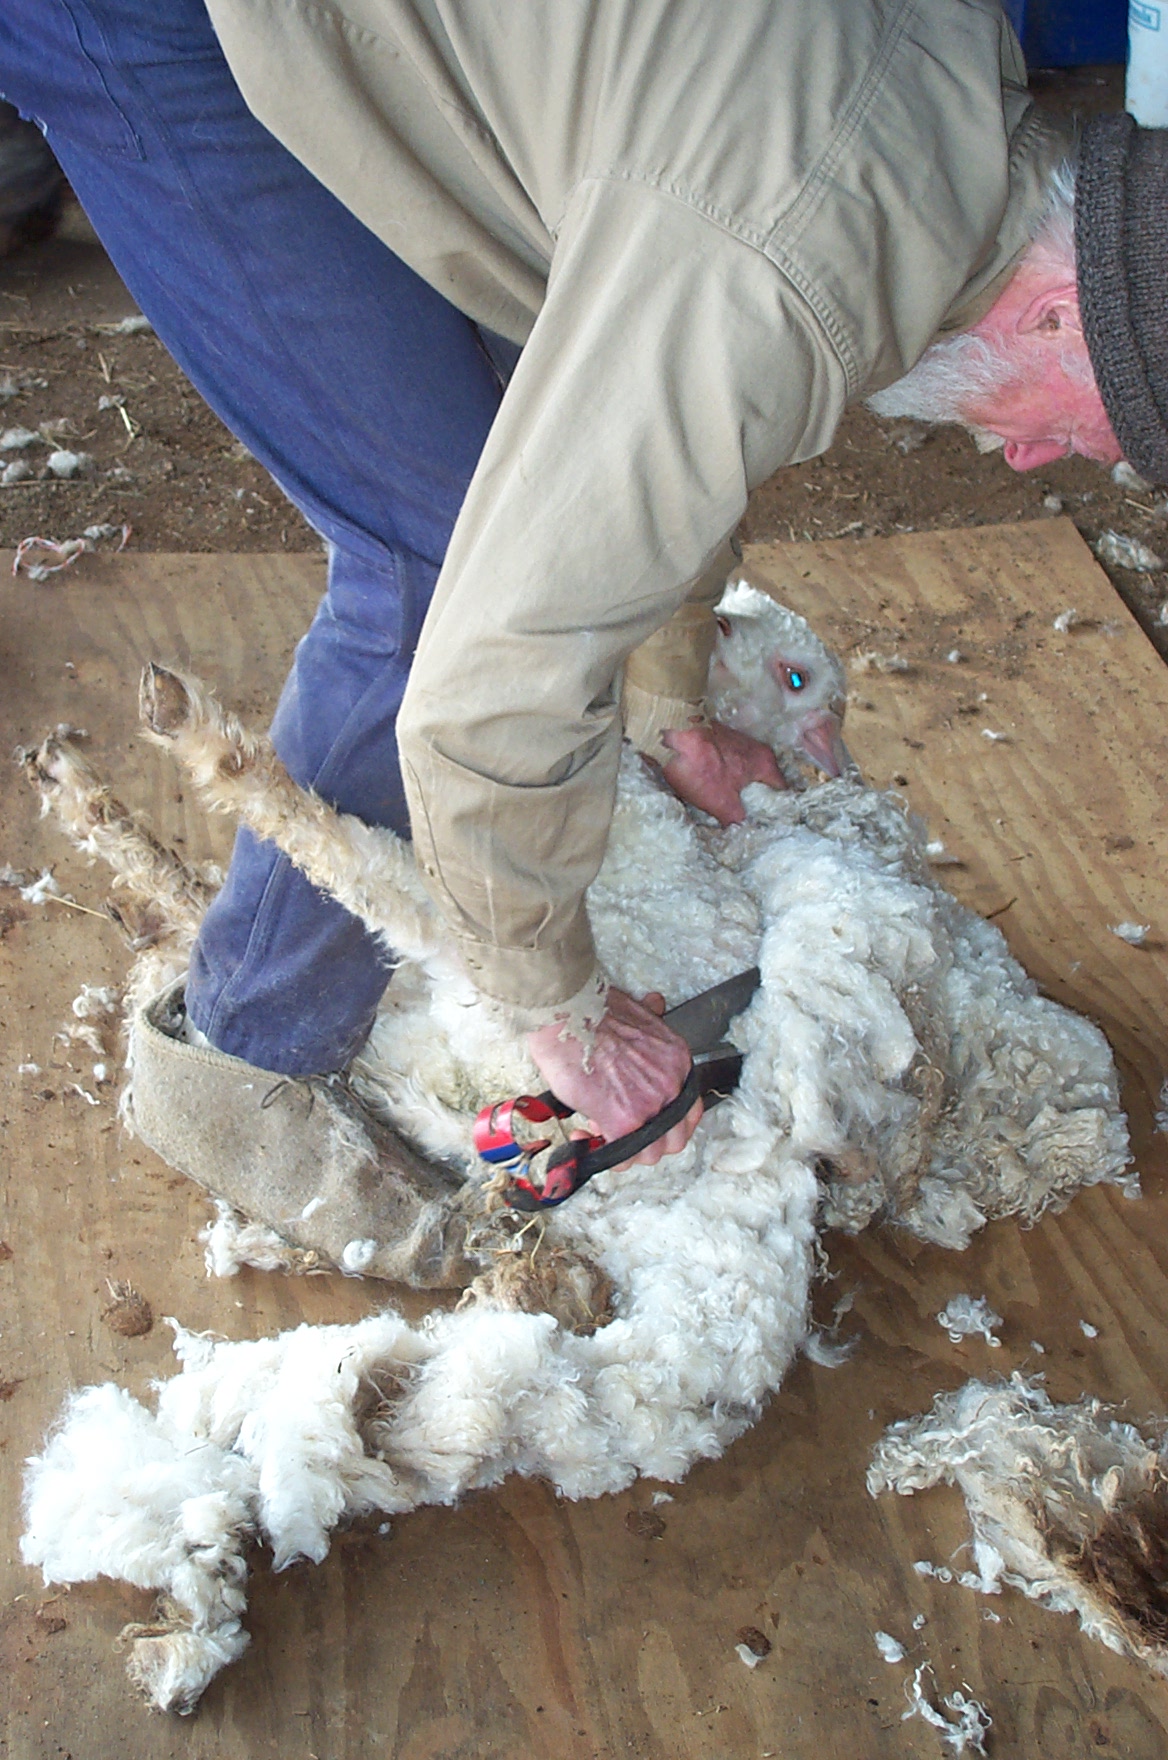 holding goat skin taut to shear cleanly